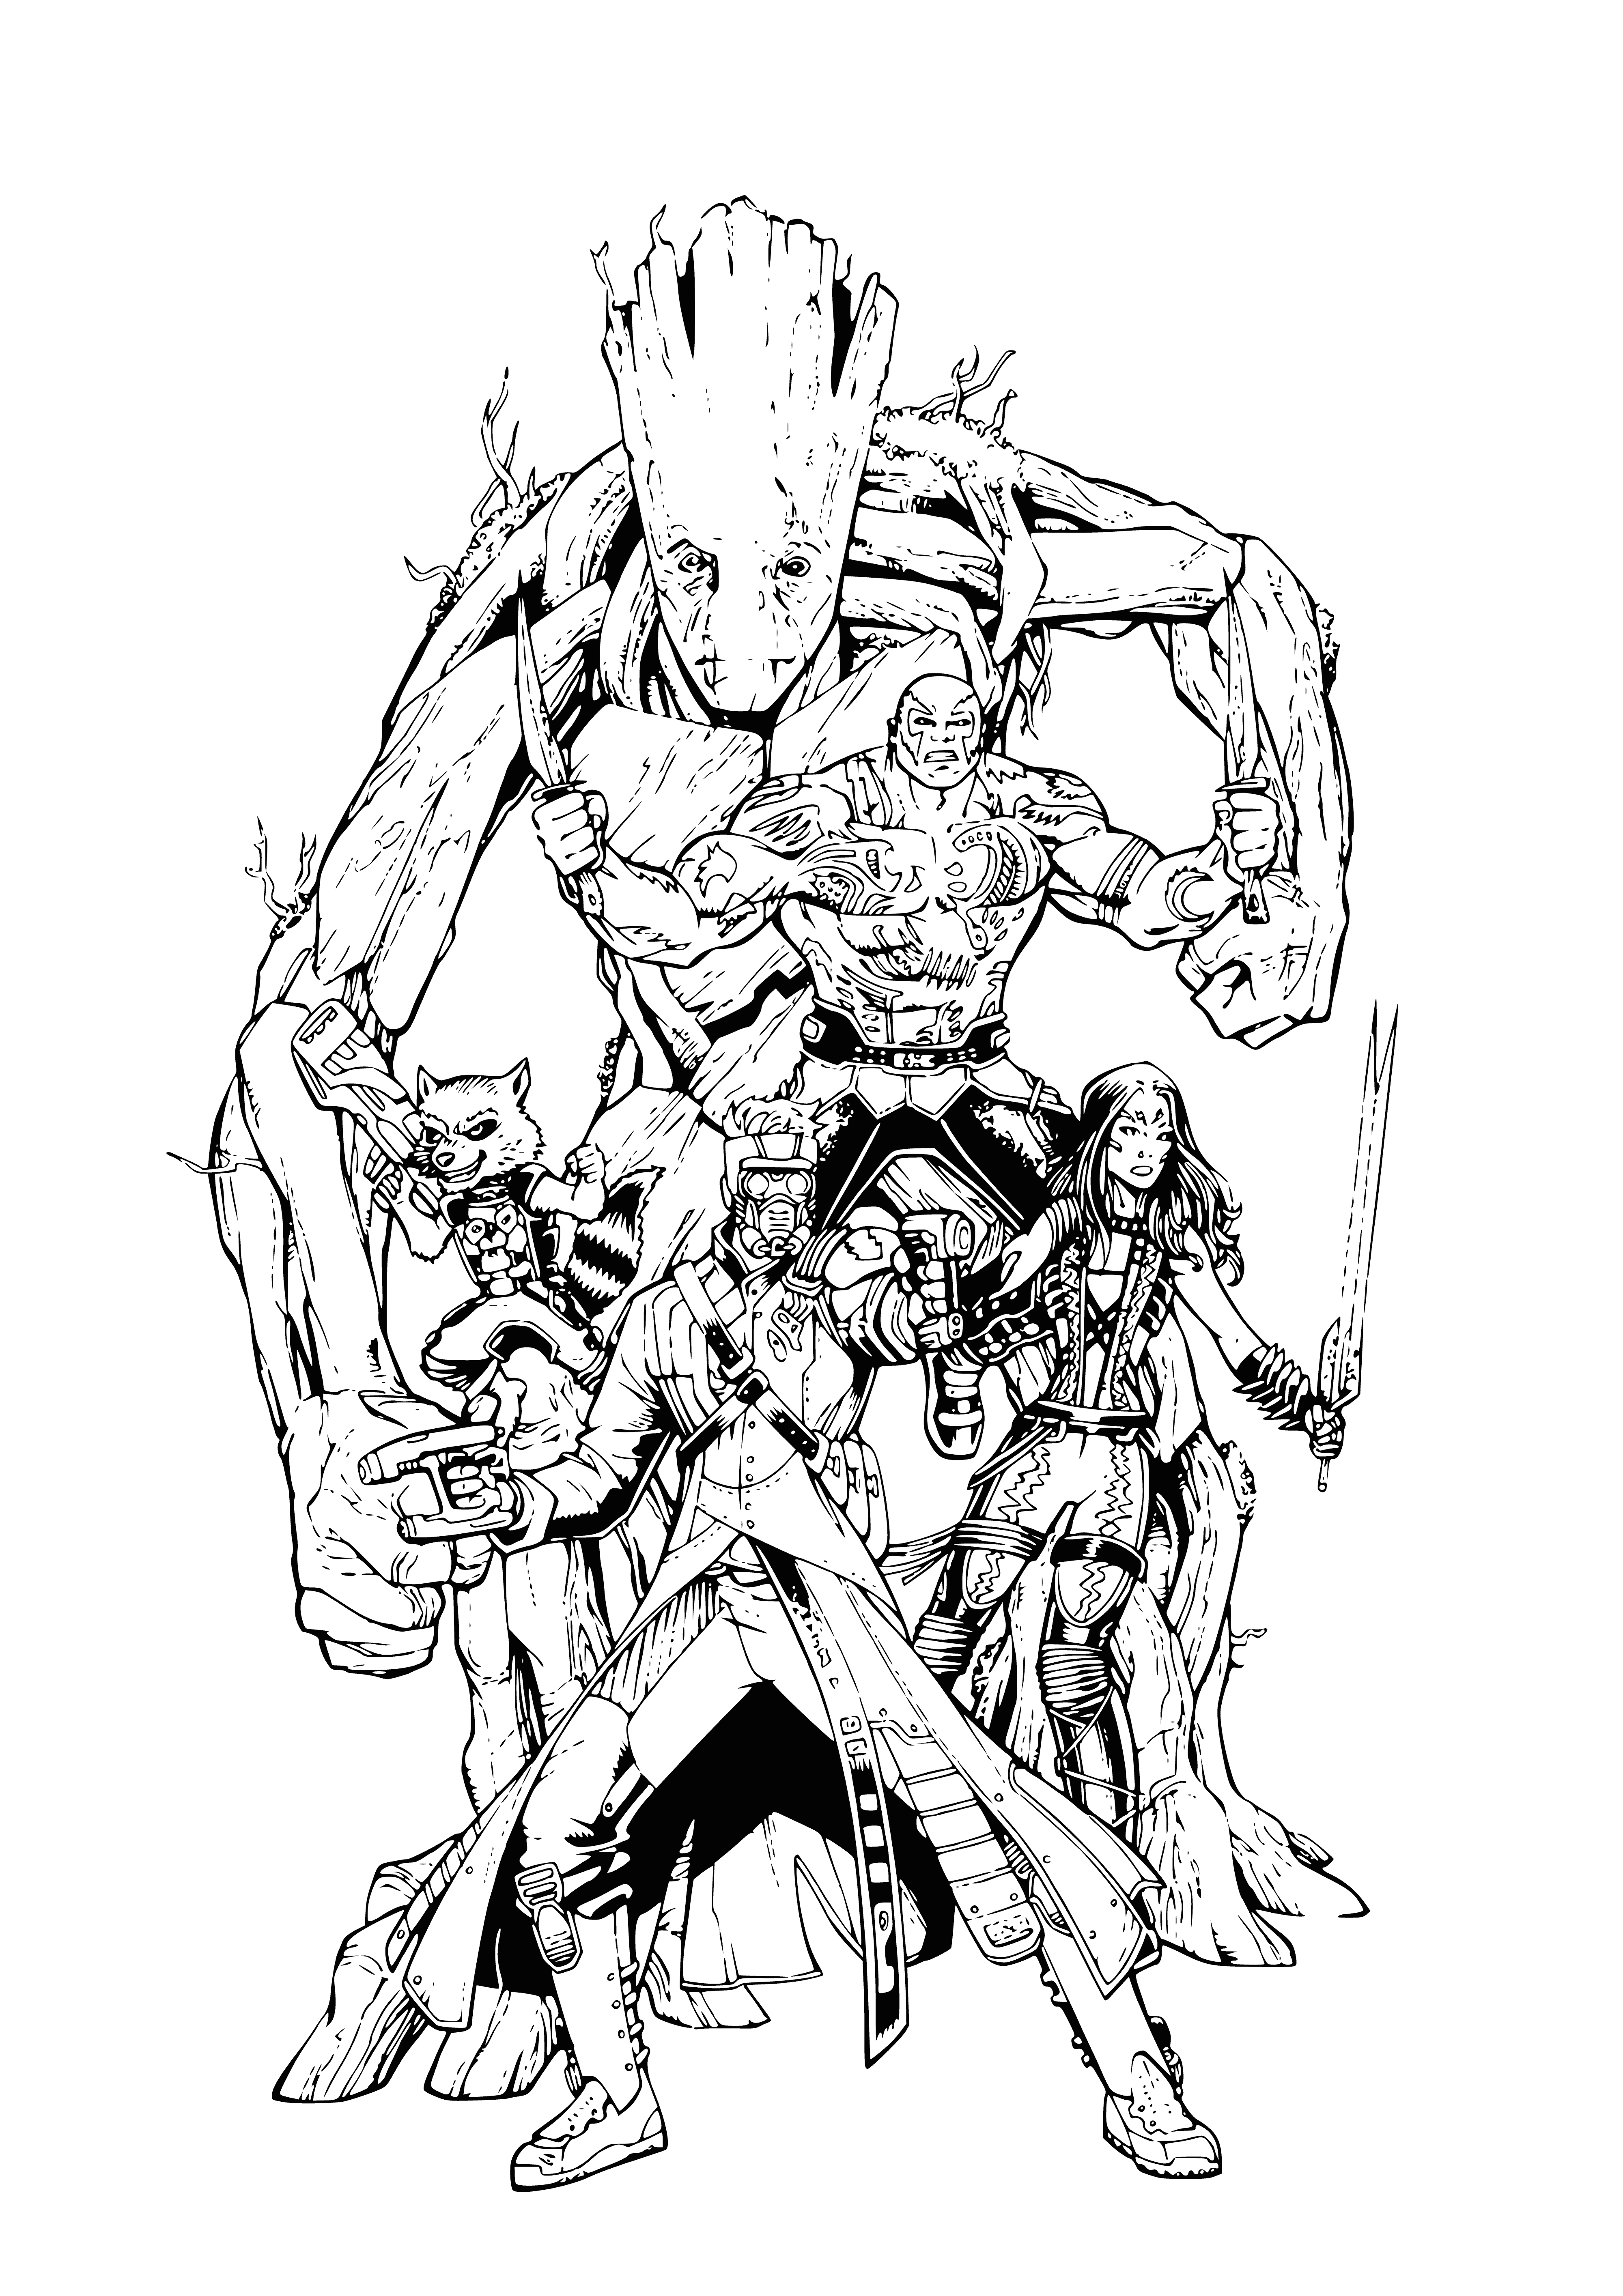 coloring page: Five heroes standing in heroic poses - Gamora, Drax, Star-Lord, Rocket and Groot - epitomize courage, strength and resolve.